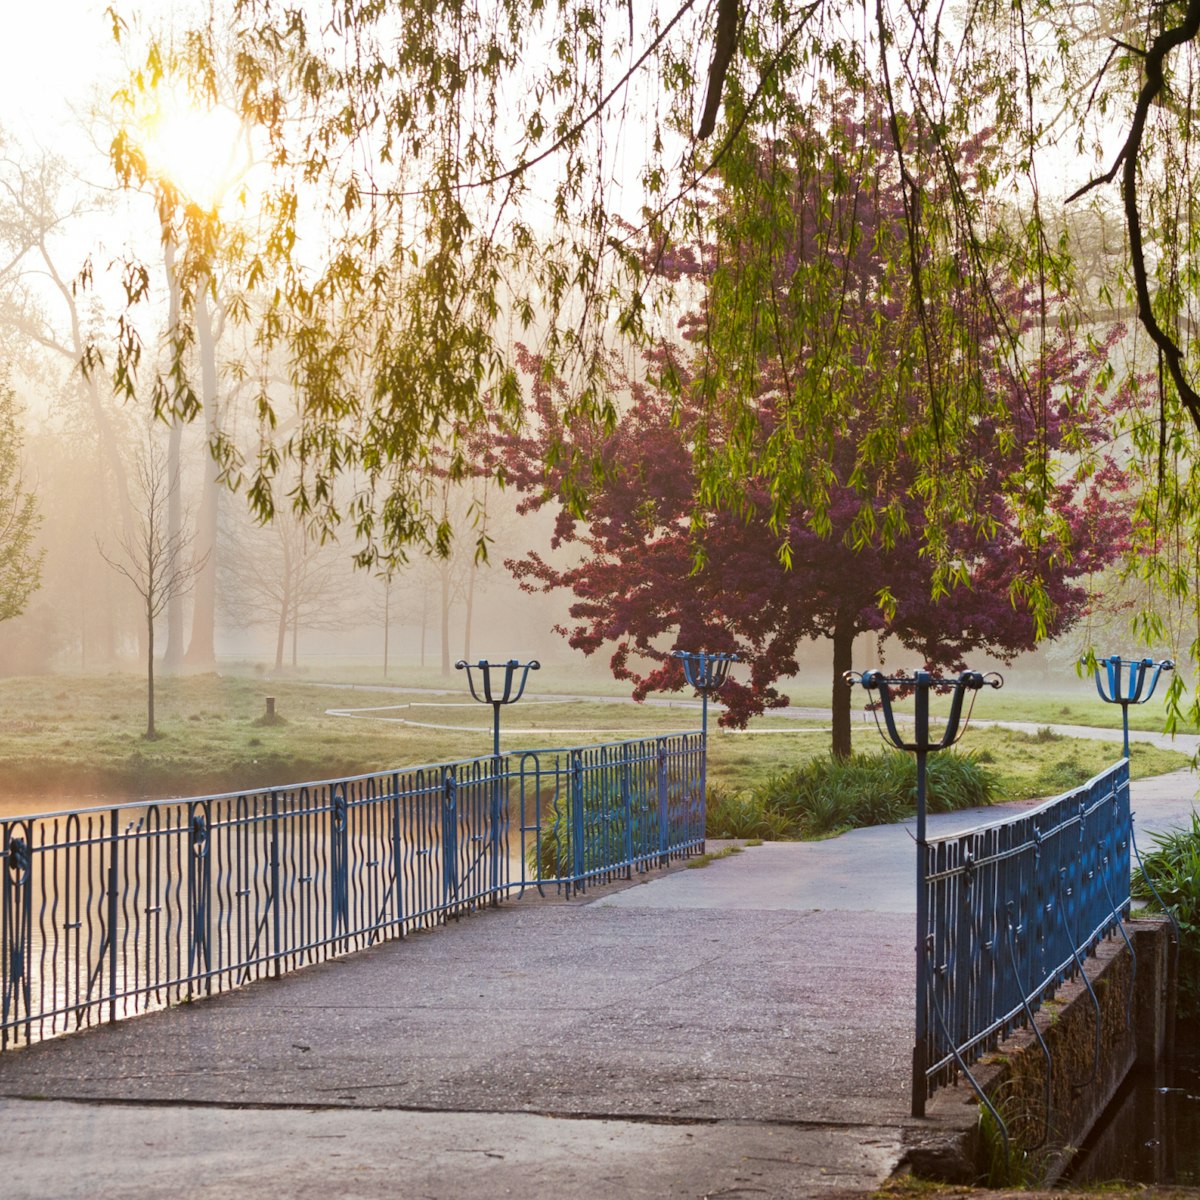 Bridge in the morning misty light, spring garden Stromovka in Prague, Czech republic; Shutterstock ID 228722590; Your name (First / Last): Gemma Graham; GL account no.: 65050; Netsuite department name: Online Editorial; Full Product or Project name including edition: Cities app POI images